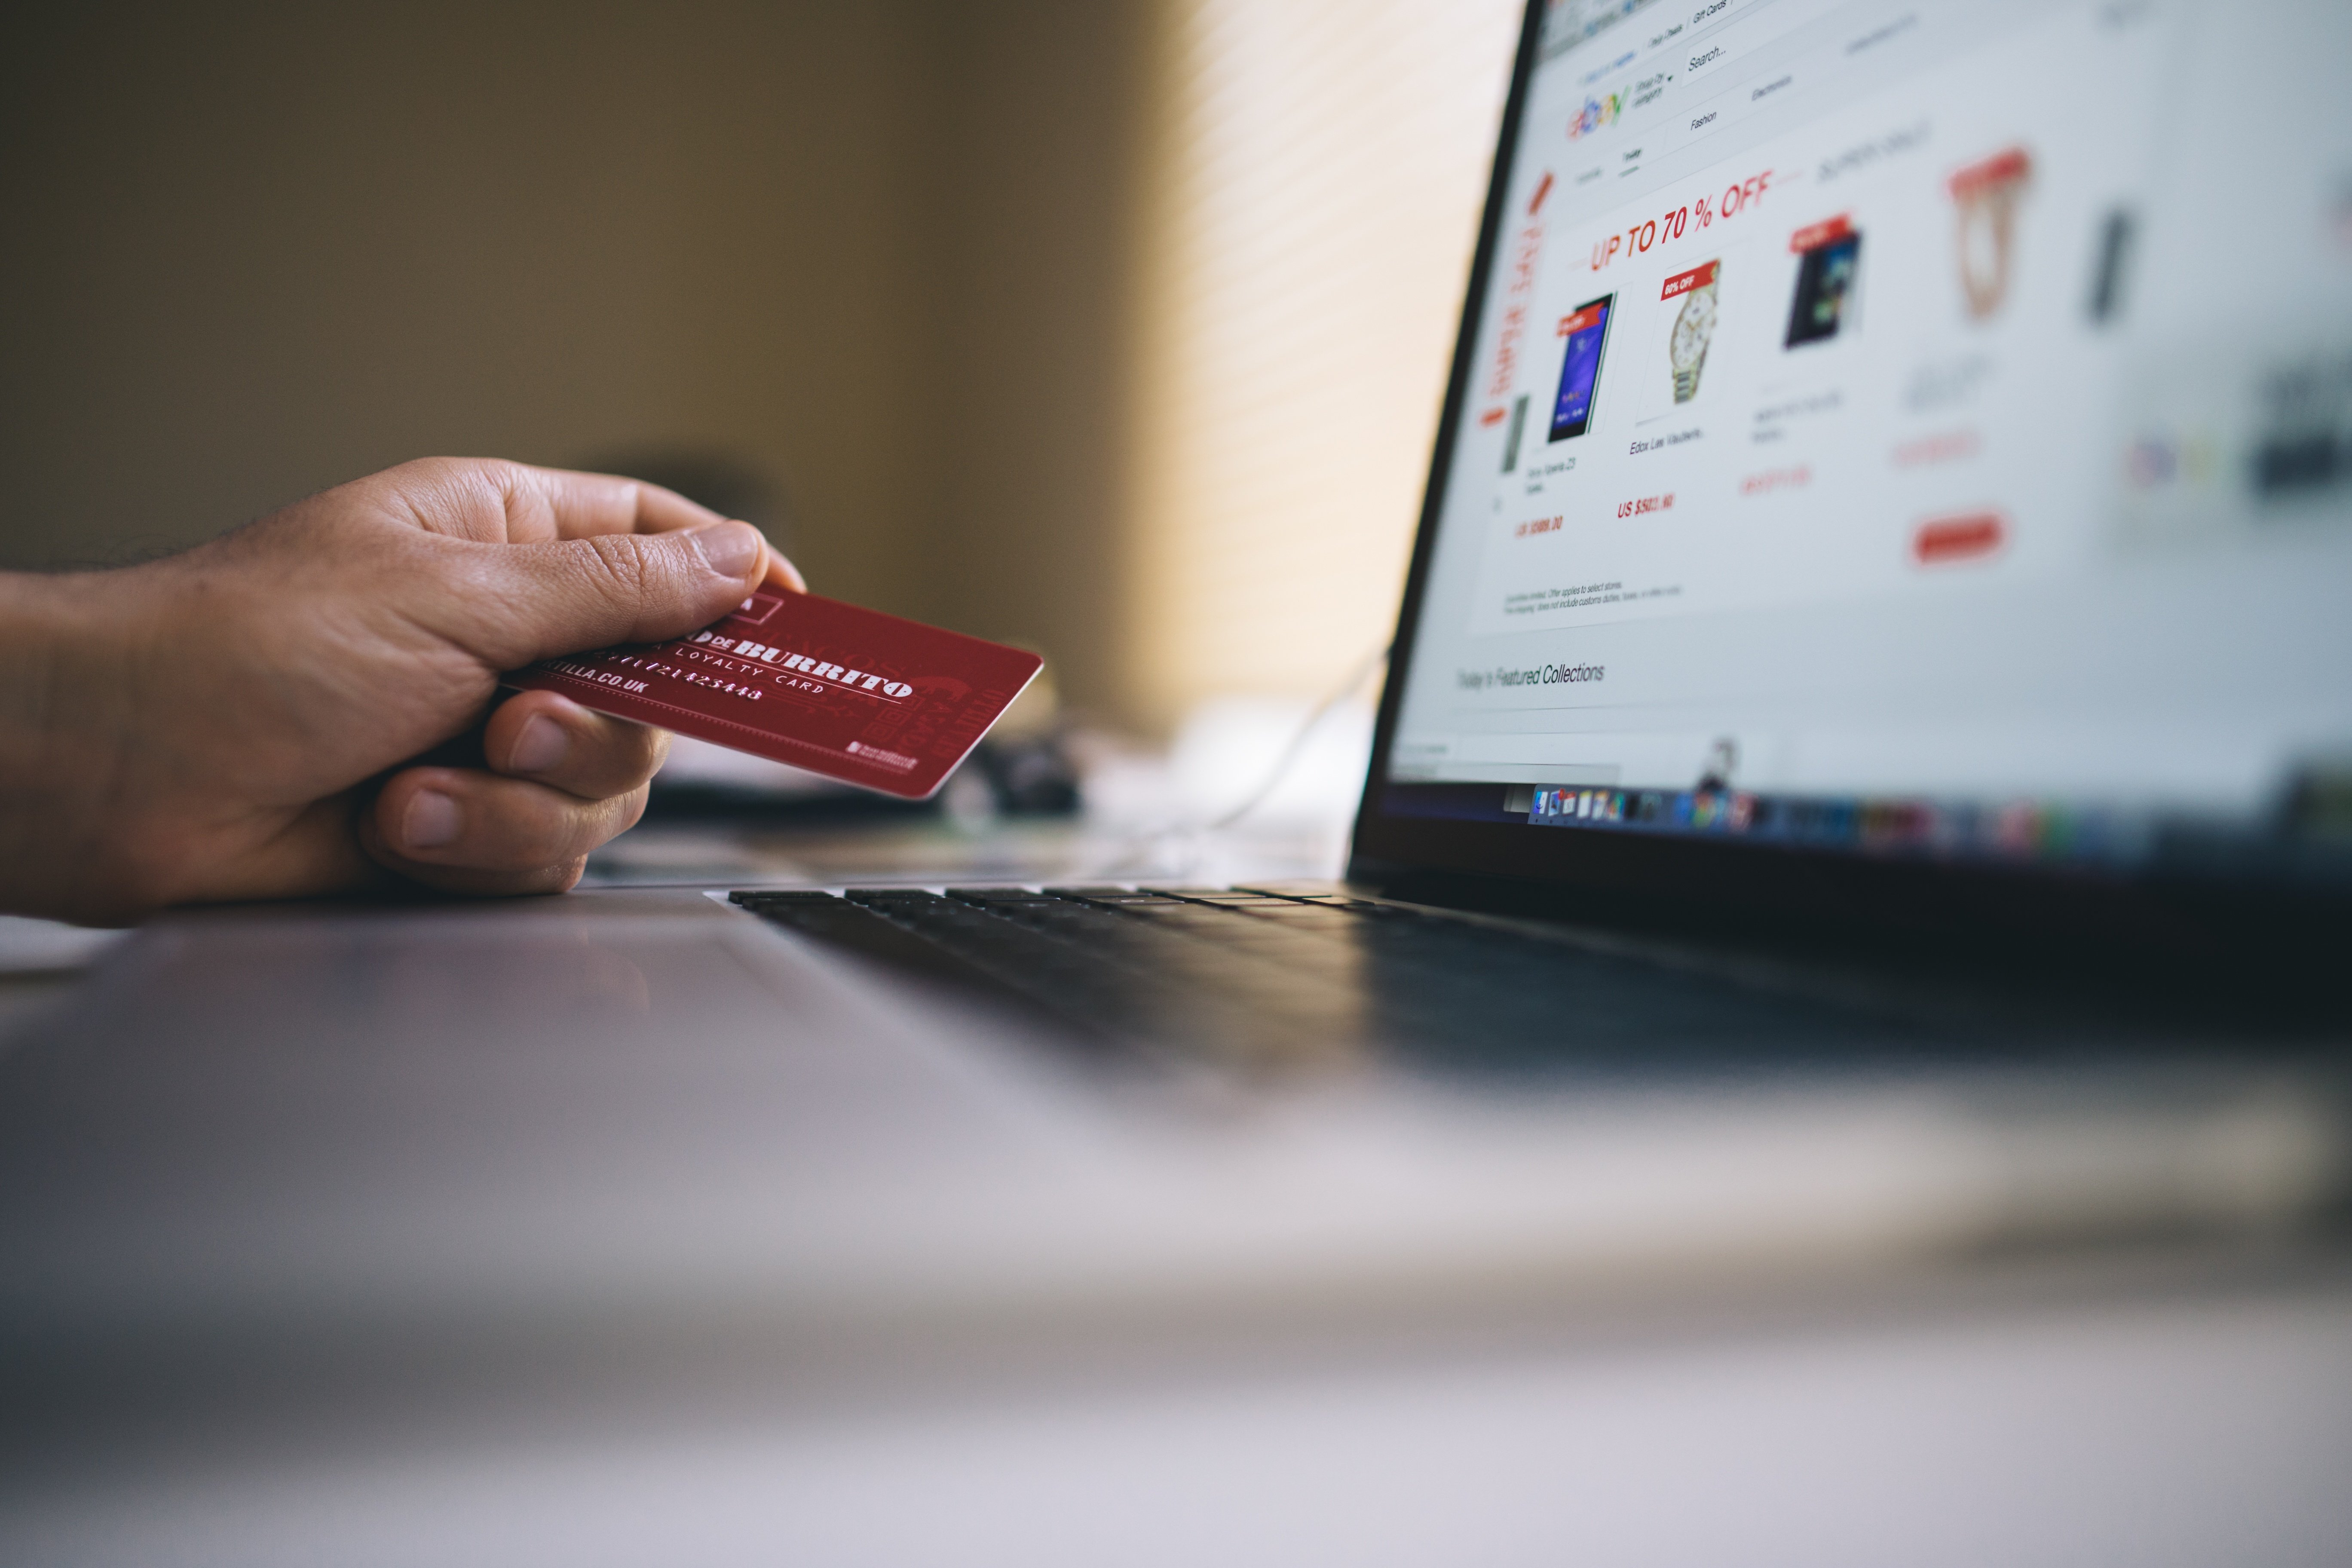 eCommerce trends in 2020